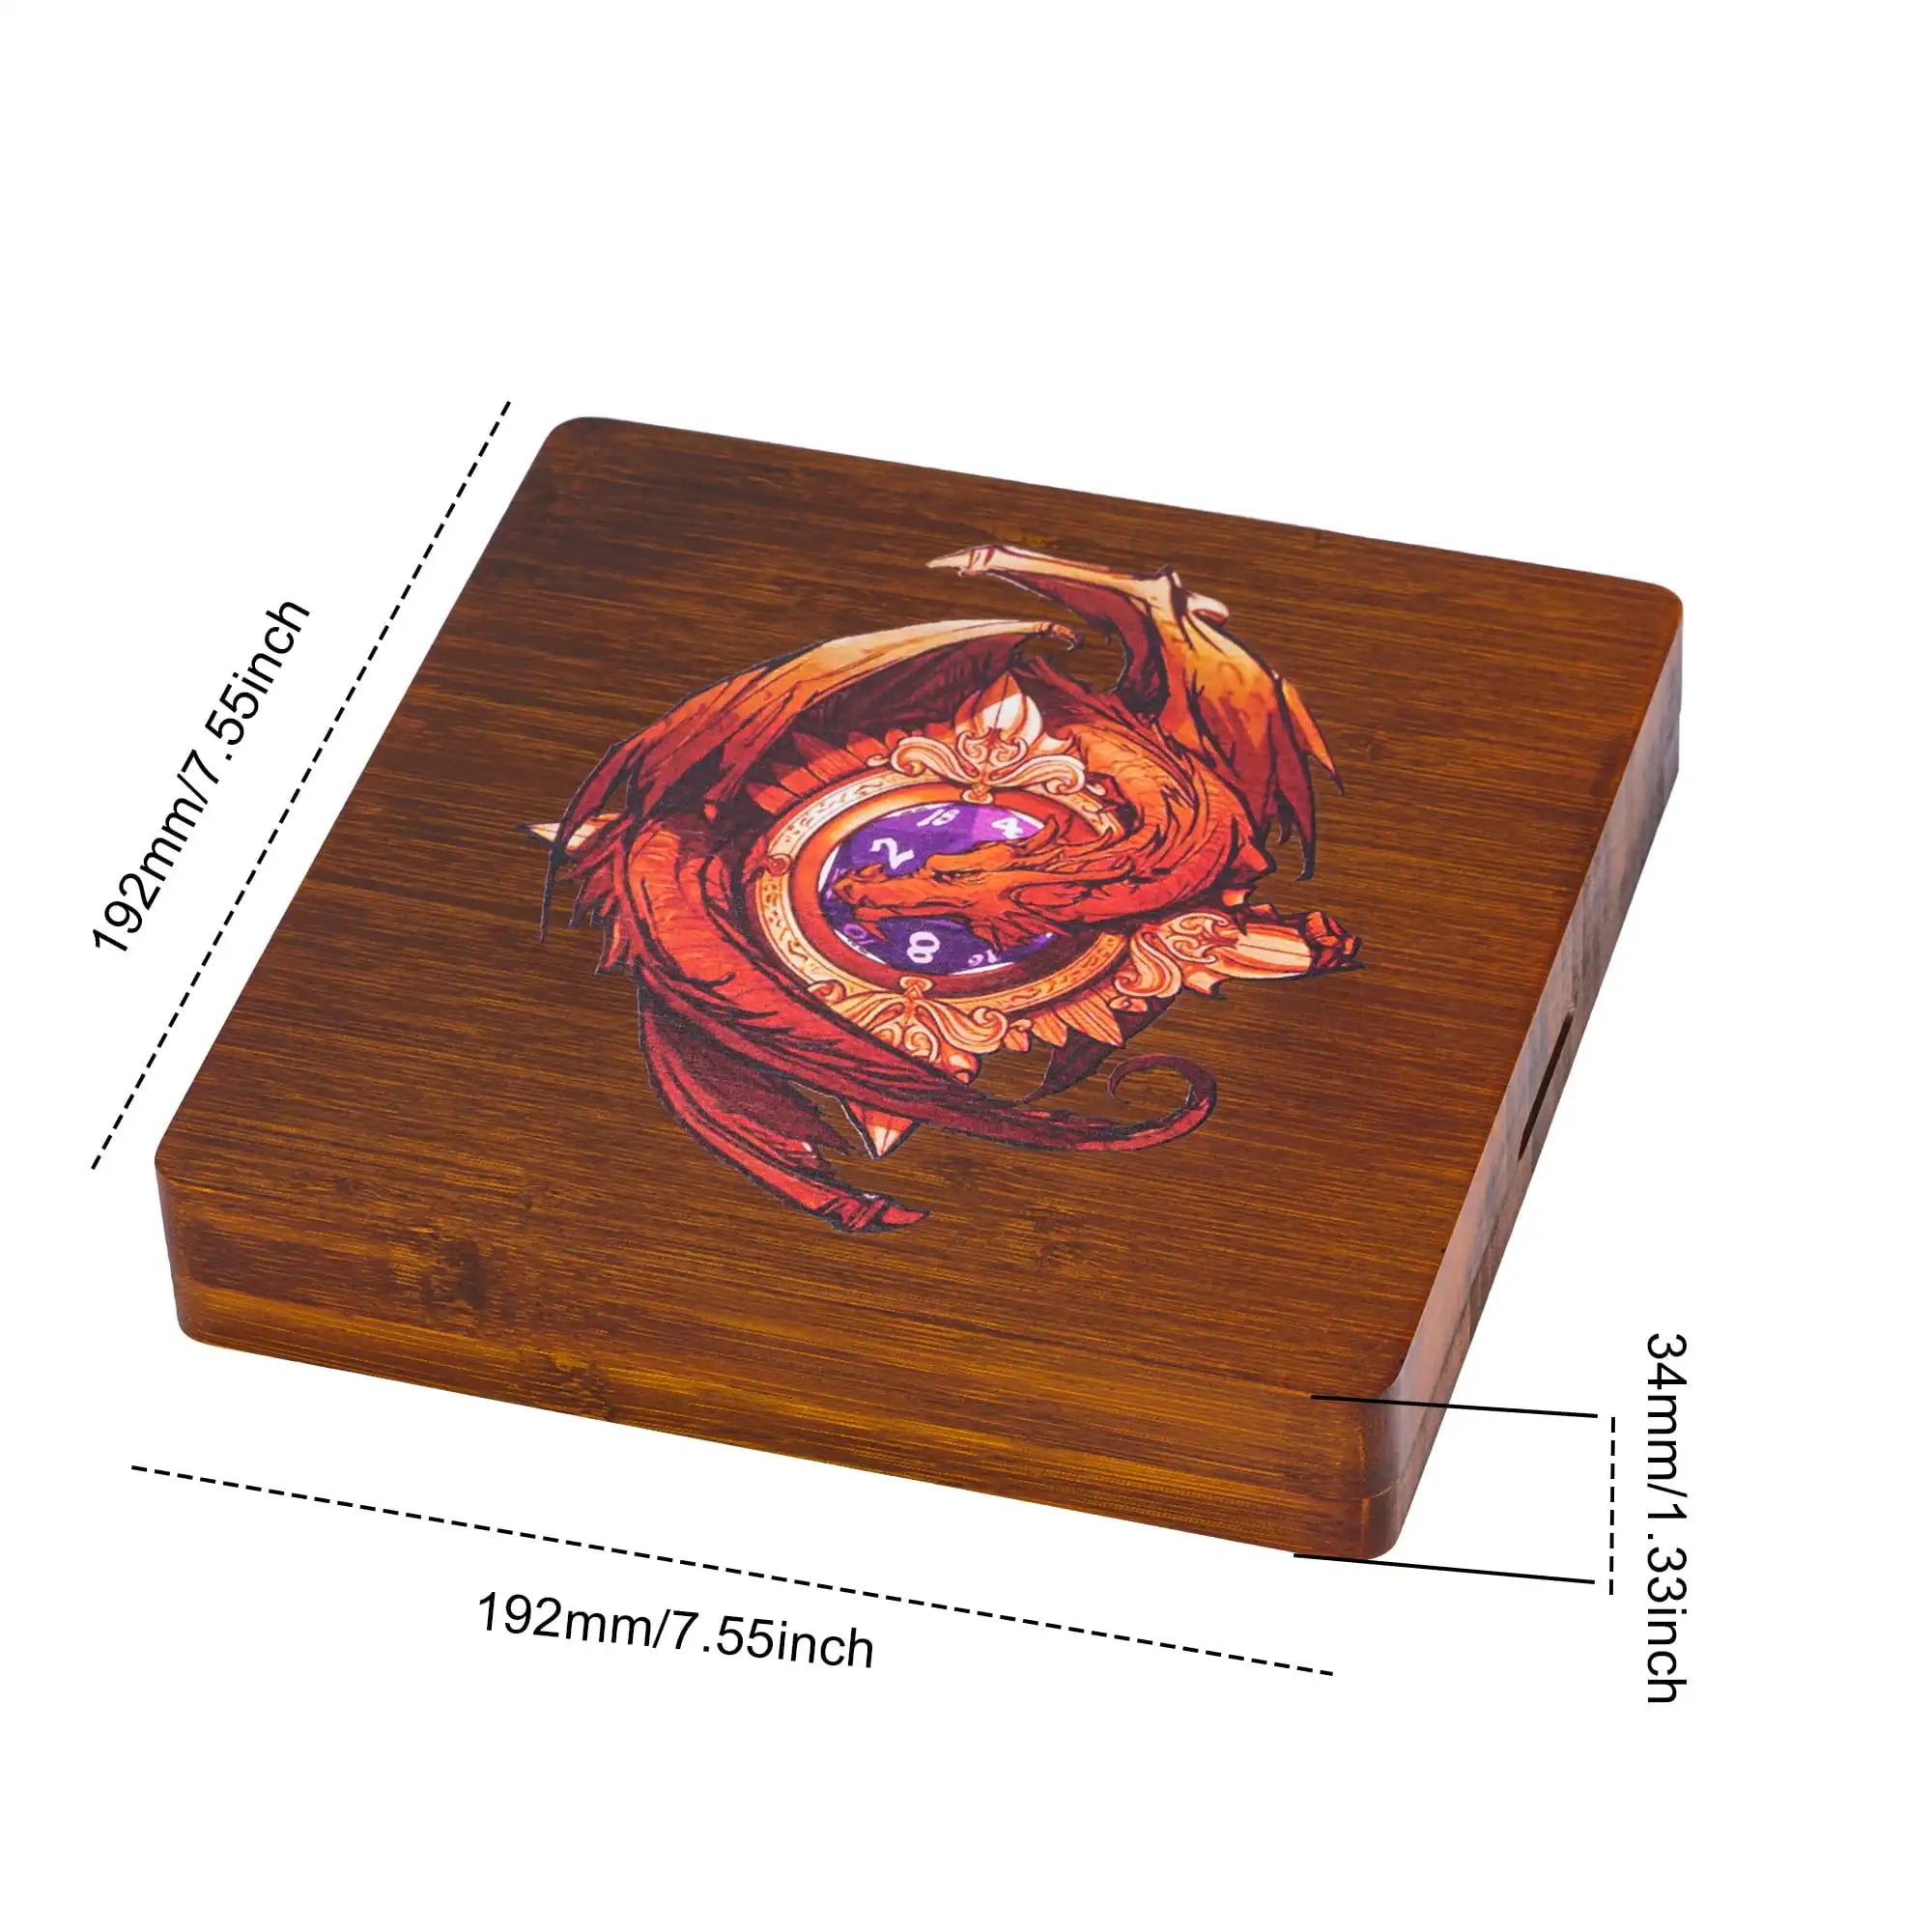 2 in 1 Wooden Dice Box & Dice Tray